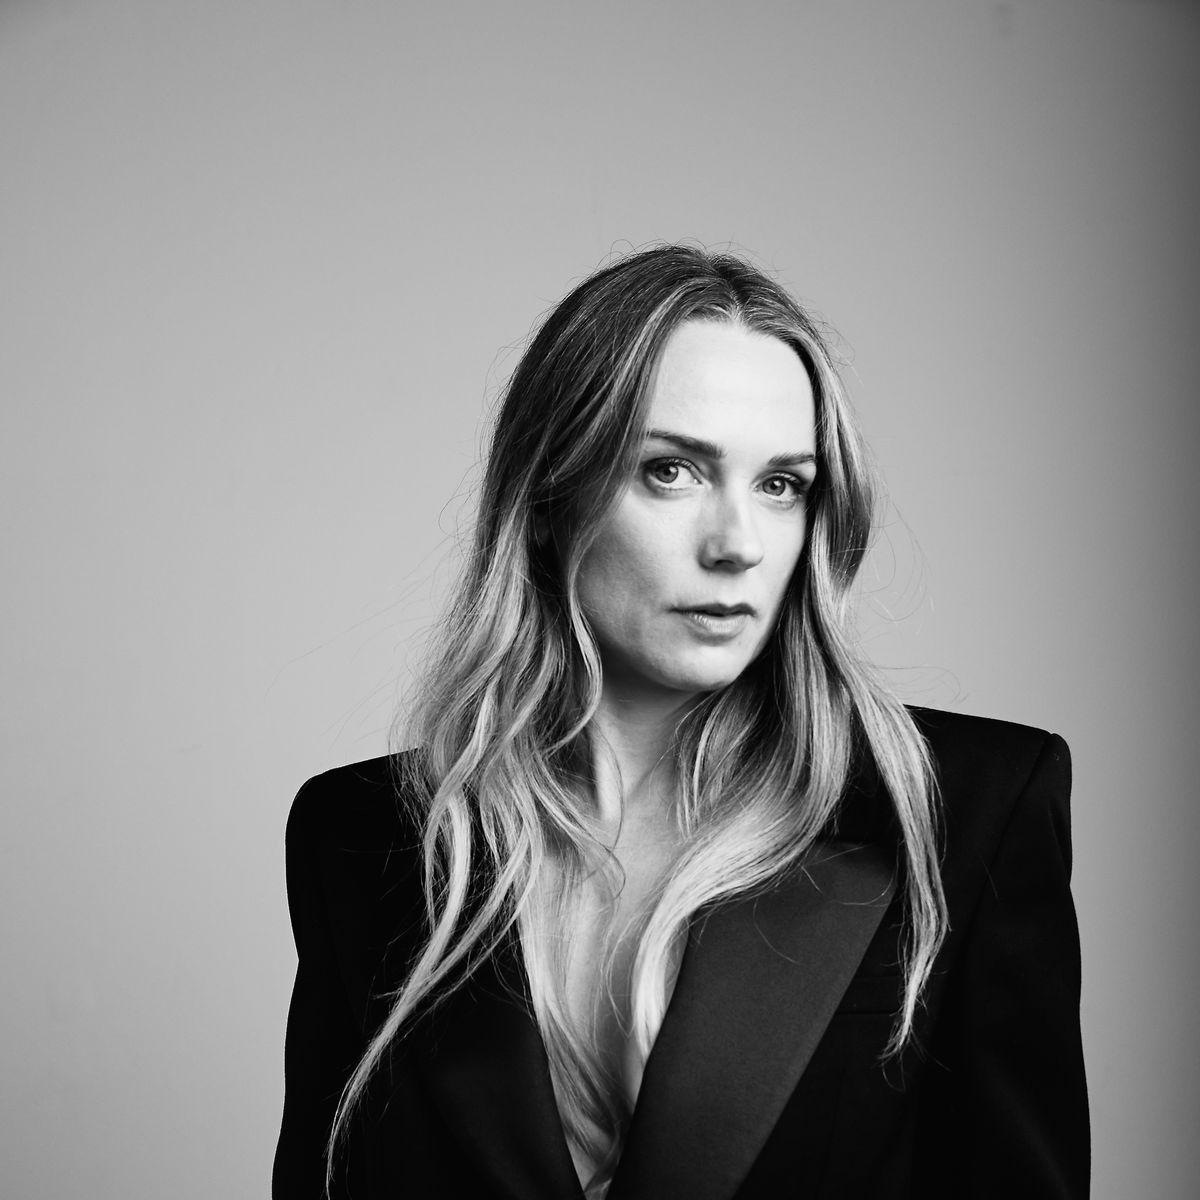 Getting Ready for Louis Vuitton with Oscar Nominee Kerry Condon – WWD